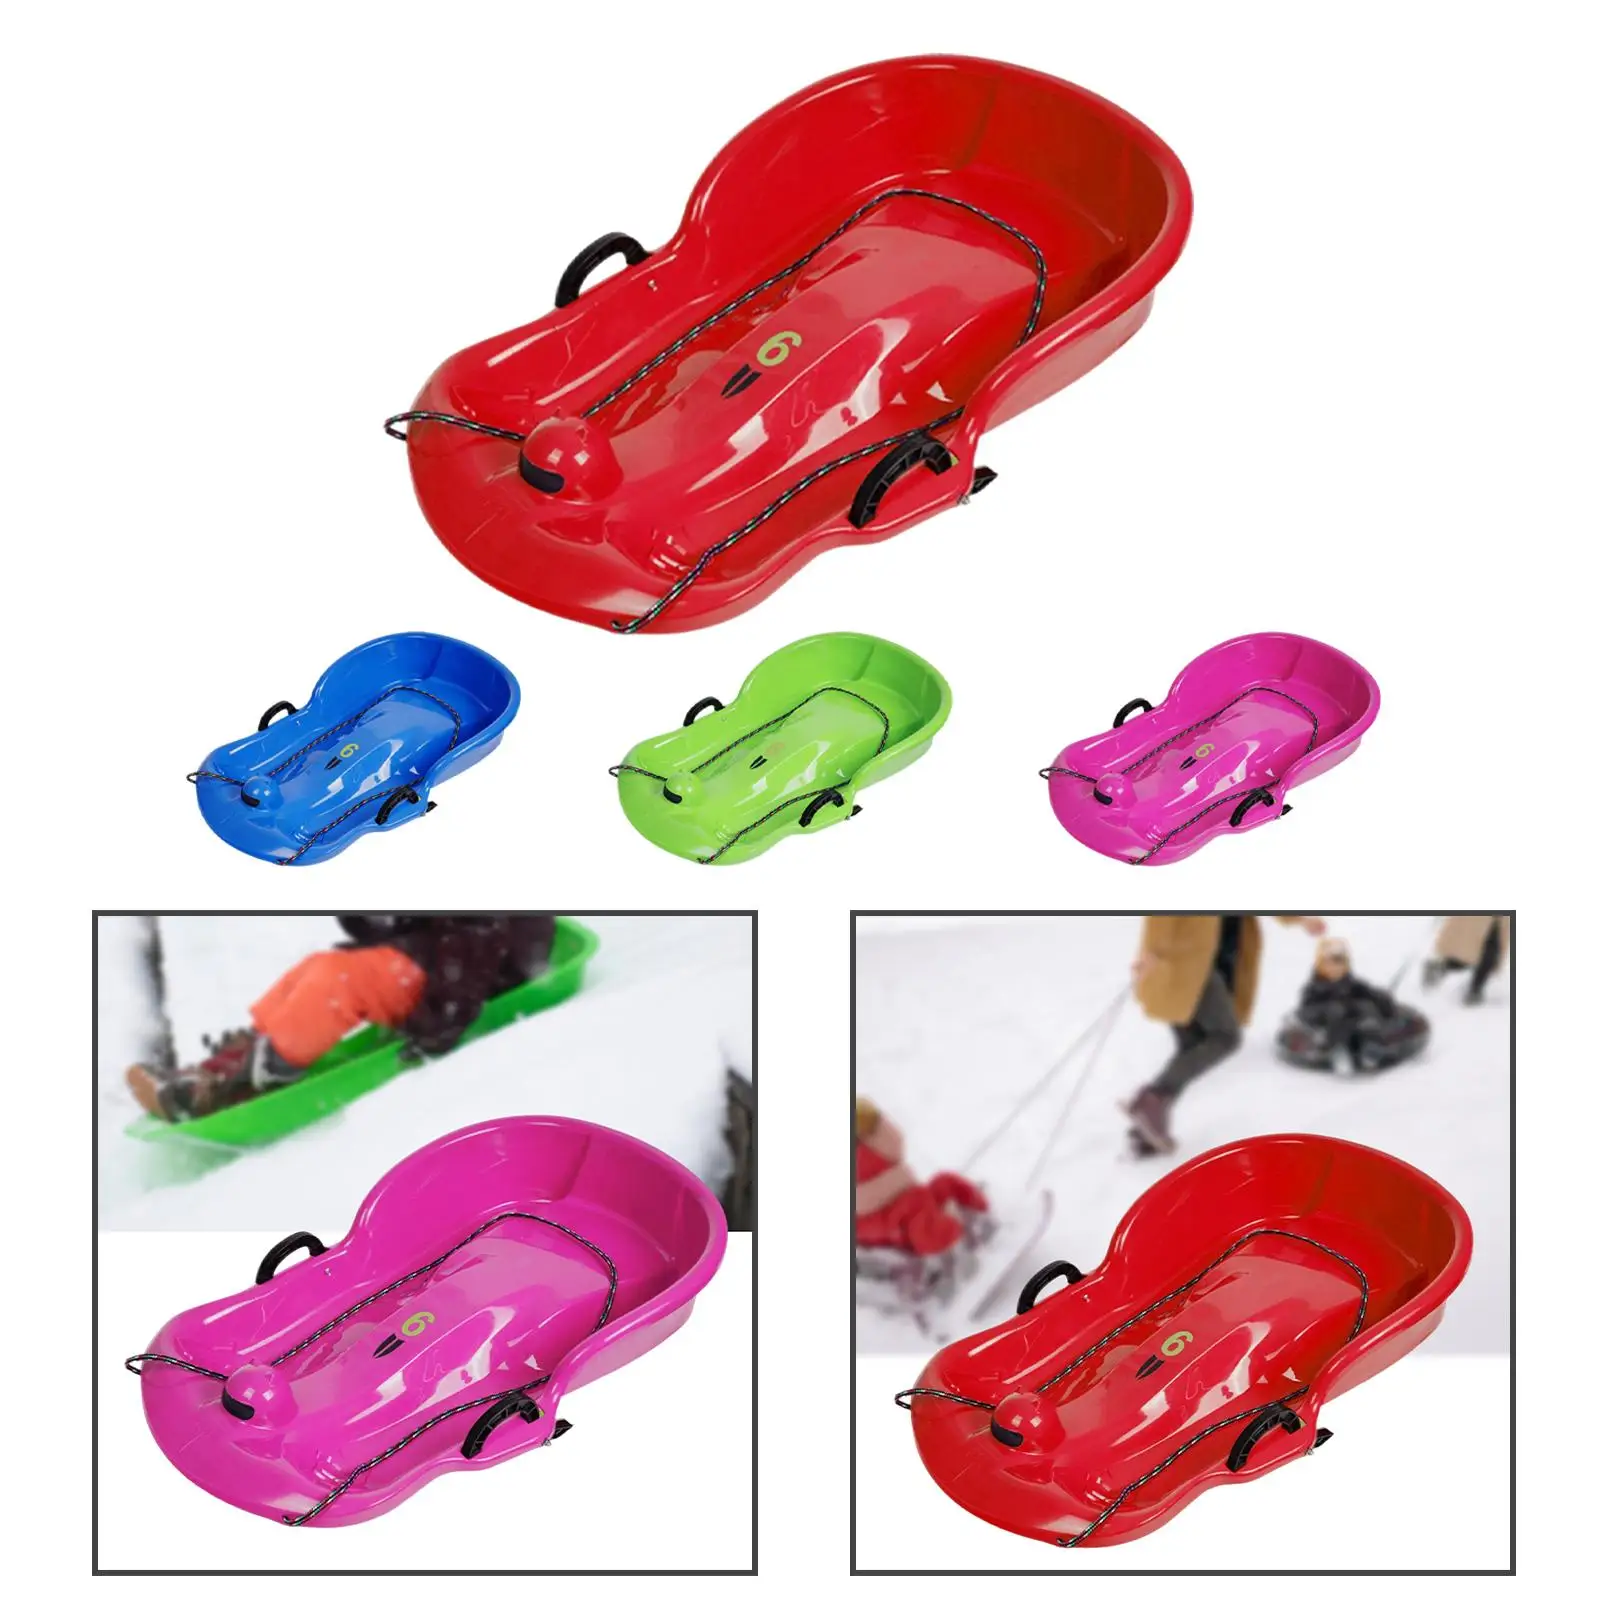 Winter Snow Sled Toboggan Sleigh Sledding with Pull Rope Ski Board Kids Sledge with Double Seat for Grass Sports Sand Children